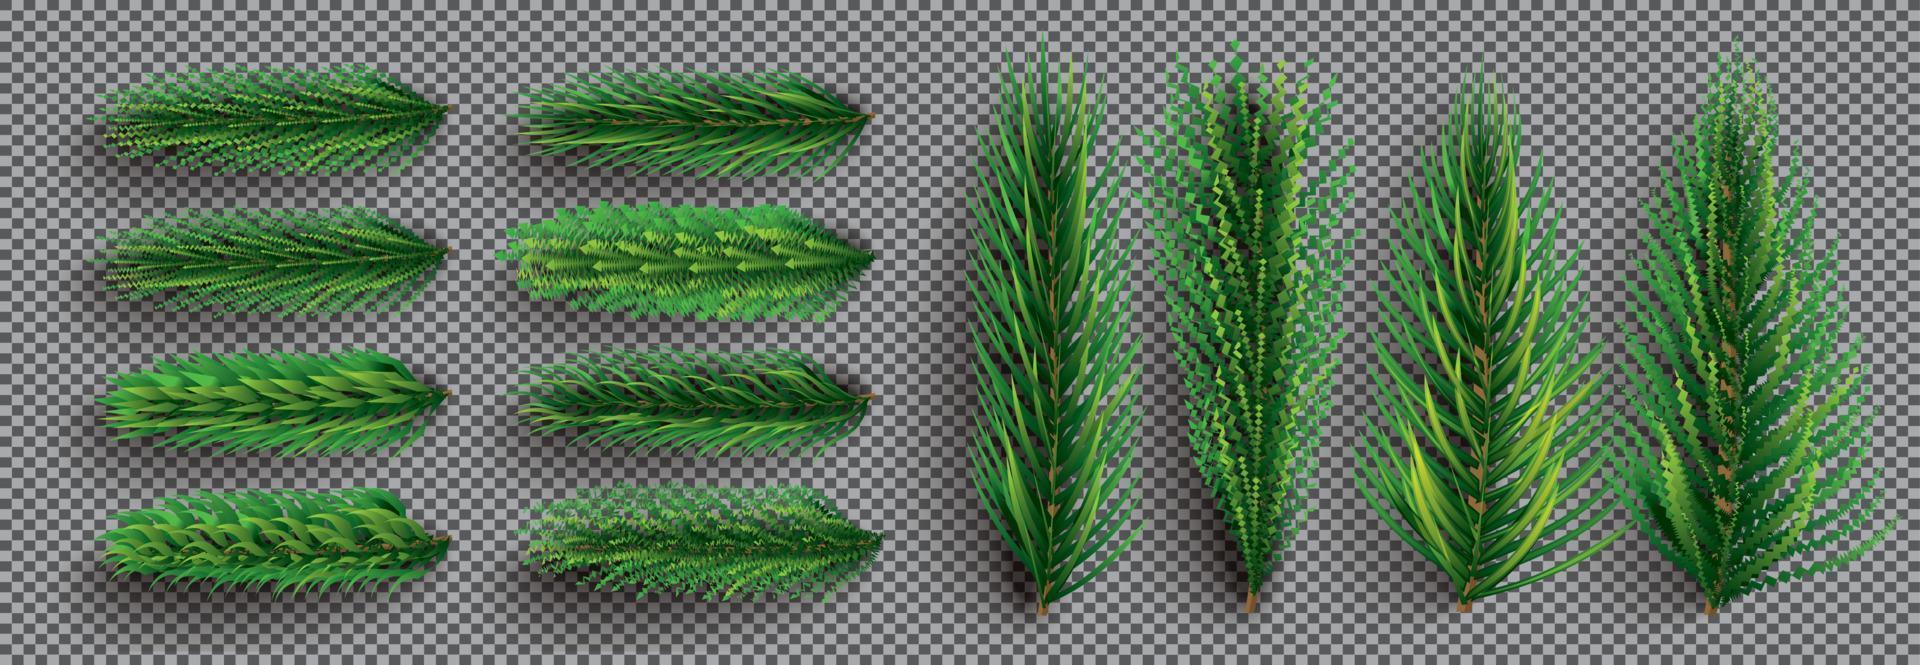 Fir Branches Set. Christmas Tree. Pine Sprigs on Transparent Grid Background. vector